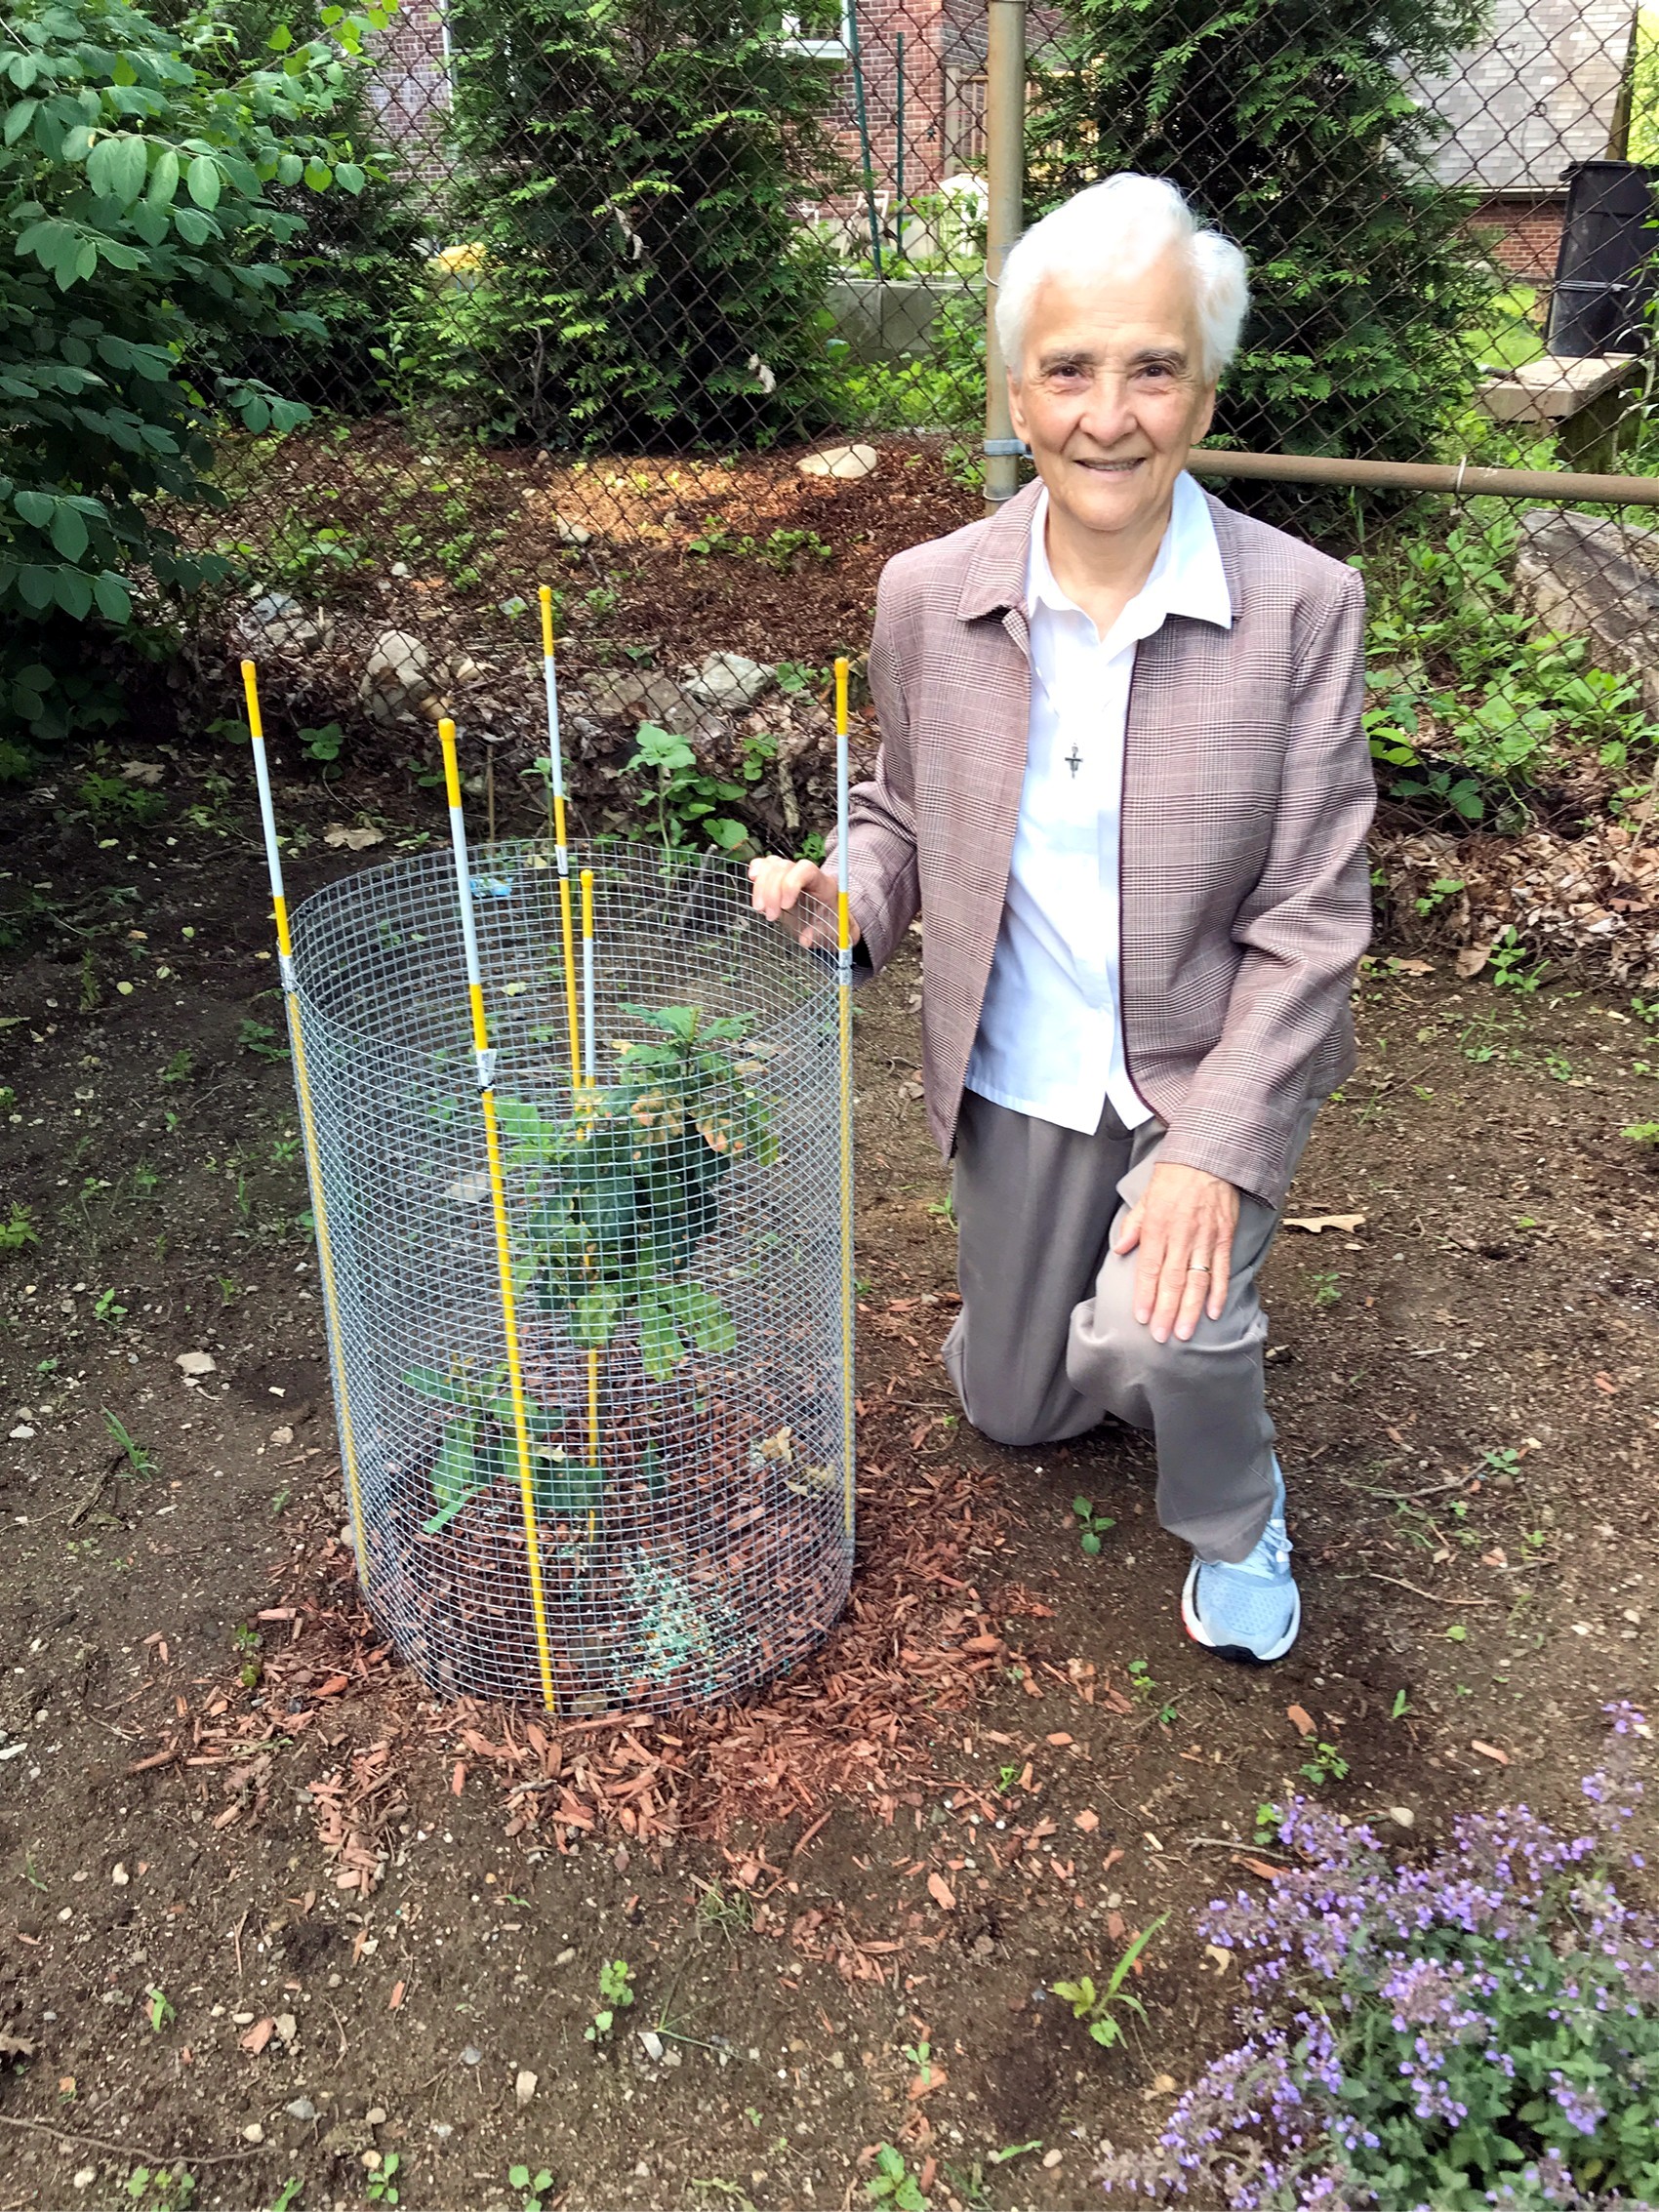 Sister Rose with the seedling protected from wildlife by a small fence.